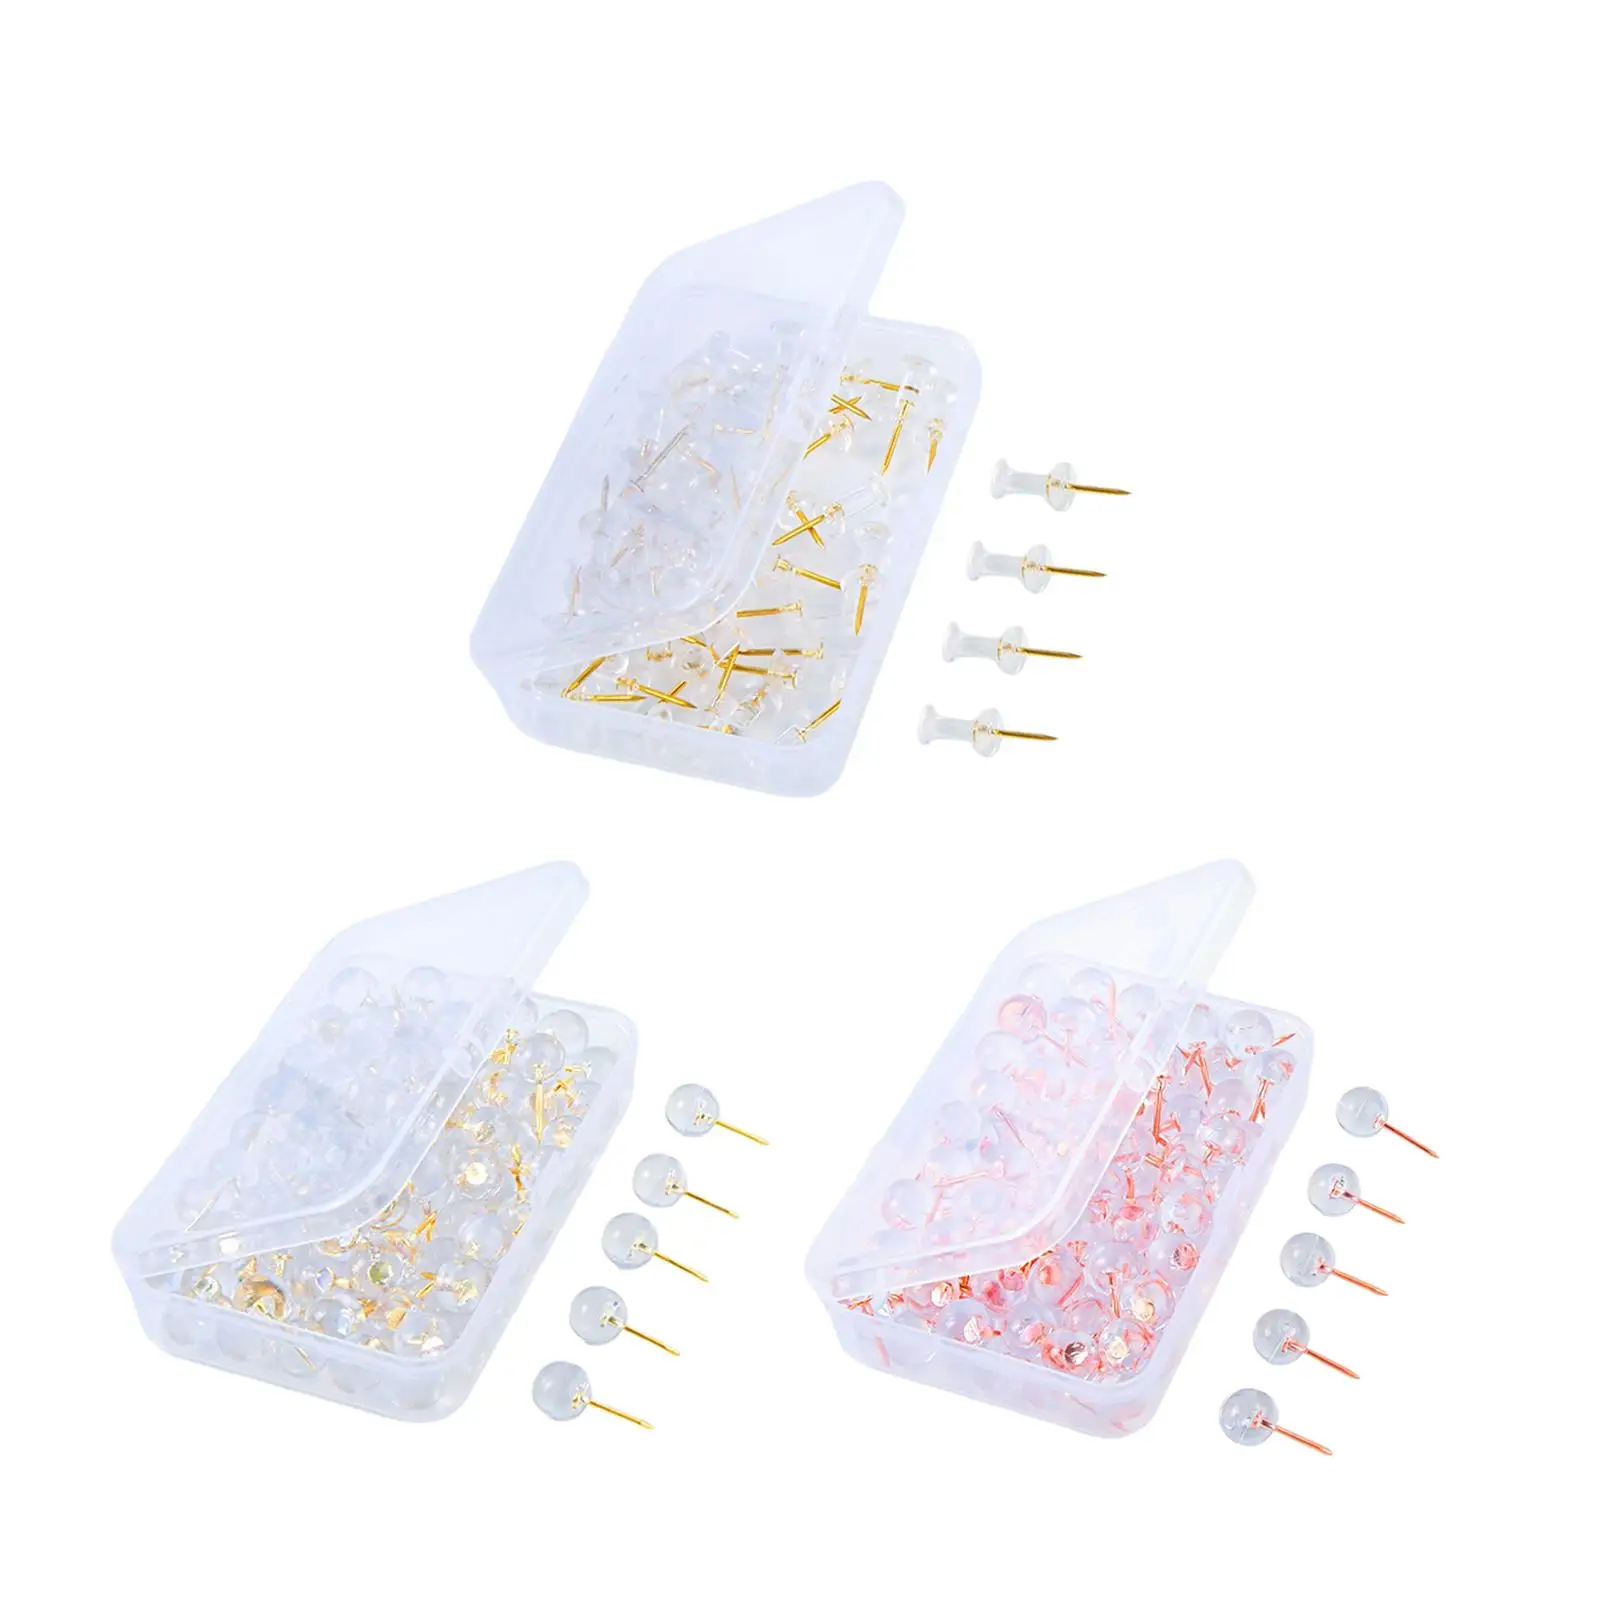 100Pcs Sewing Pins Positioning Pins Accessories DIY Lightweight with Storage Box for Crafting Sewing Dressmaker Quilting Tailor